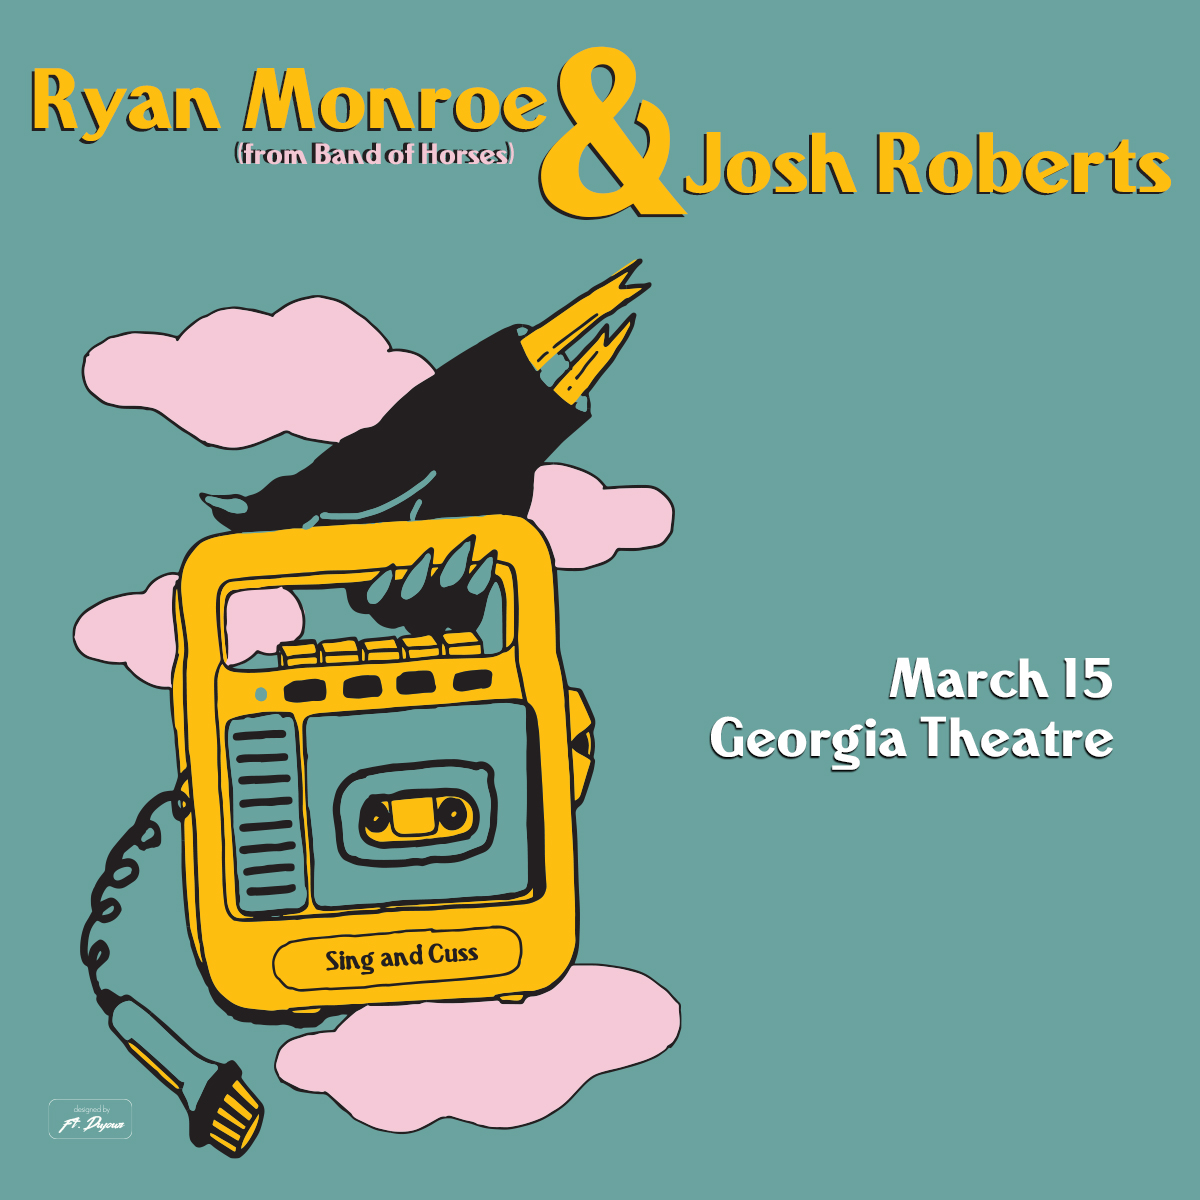 B2B at @GaTheatre this week 🤘🏼 An Evening with Ryan Monroe of Band of Horses & Josh Roberts on wednesday, march 15th 🎫: bit.ly/3xdNGlR then... @TheMovementVibe on thursday, march 16th! 🎫: bit.ly/3P0ZVsi